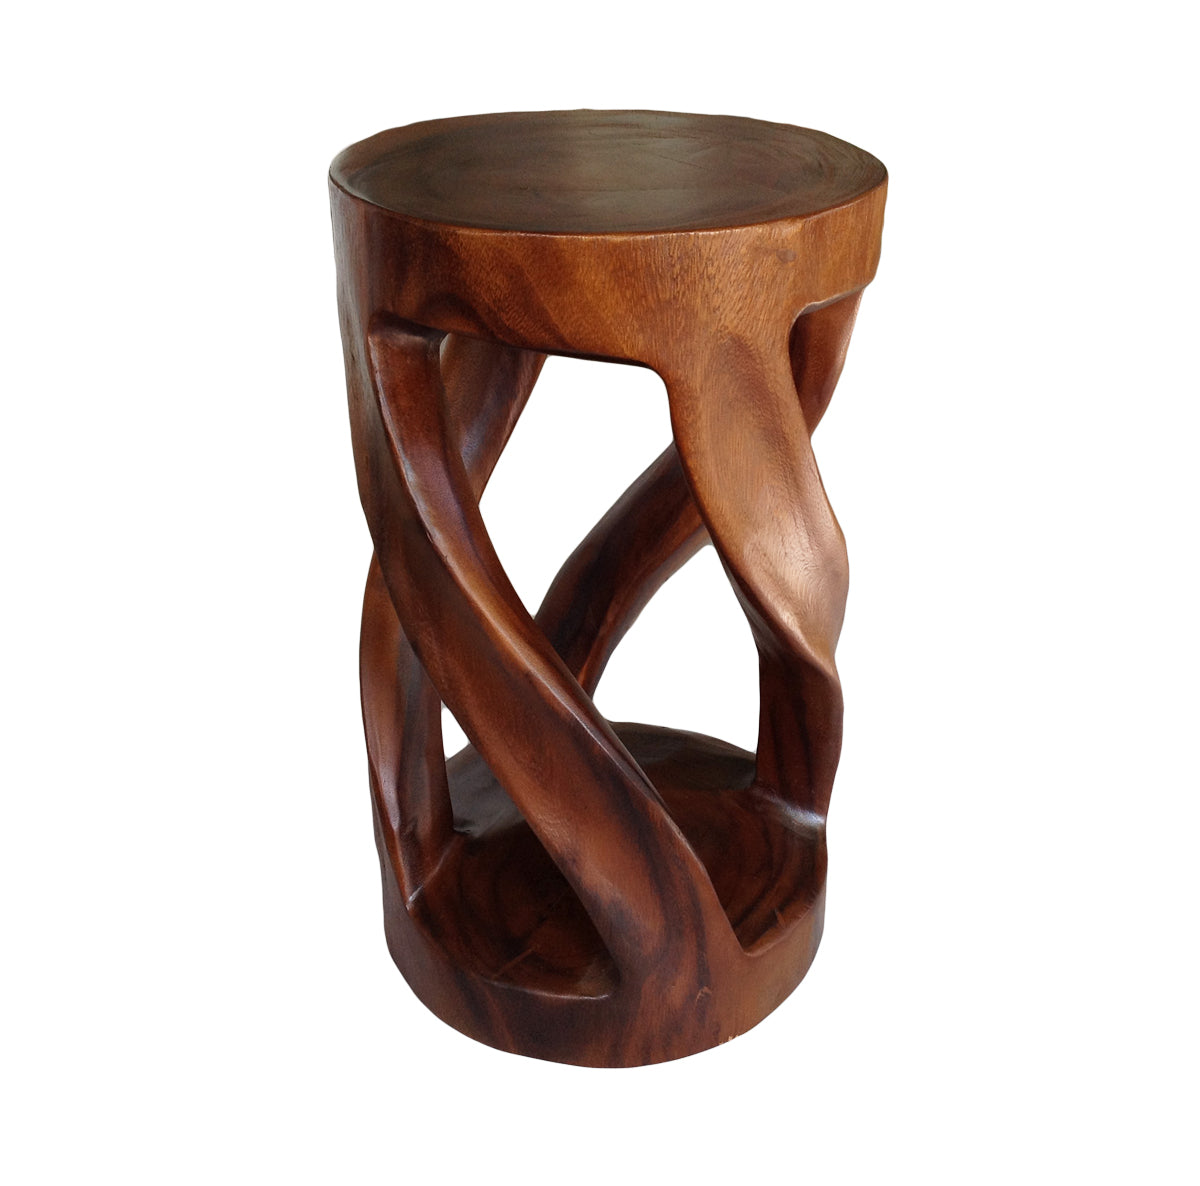 Wood Side Table - Round Top Stool - Vine Twist 20 inch - Caramel Brown